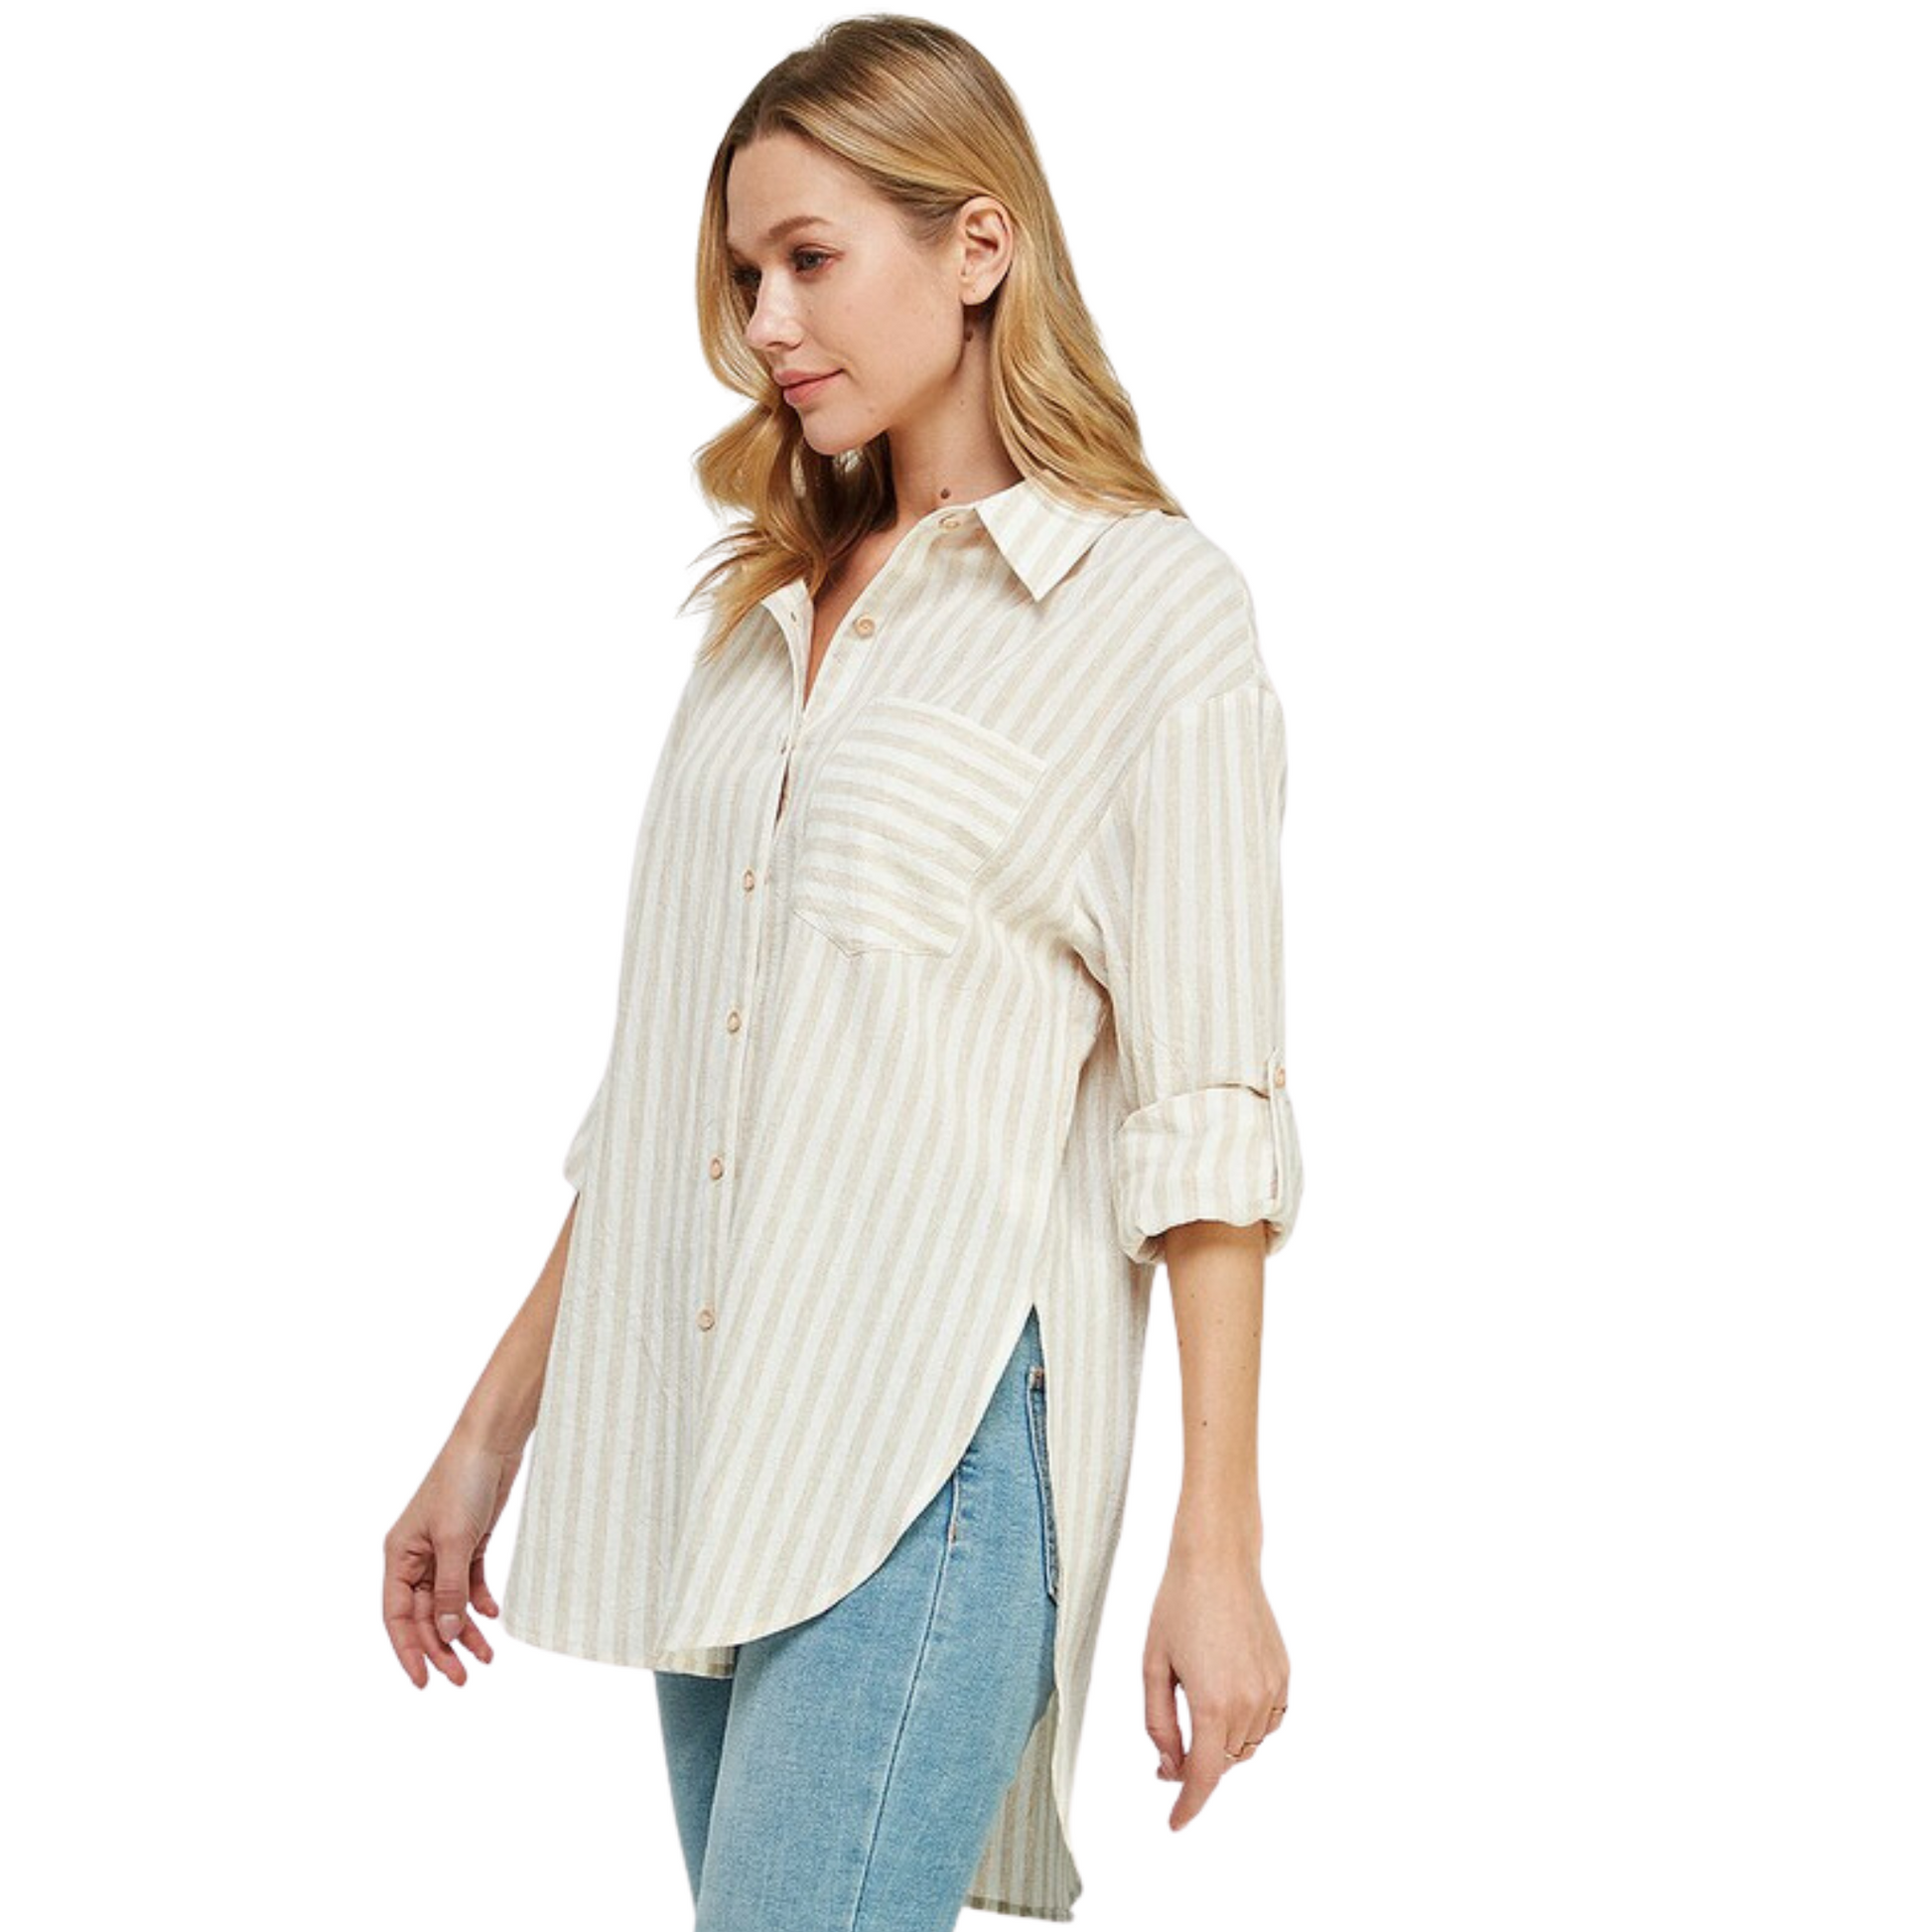 The Breezy Linen Boyfriend Shirt is the perfect mix of style and ease. Made from the best quality linen, this classic striped shirt is a stylish option for any wardrobe. The button-up design, collared neck, and contrast stripes make it a versatile piece for any occasion.